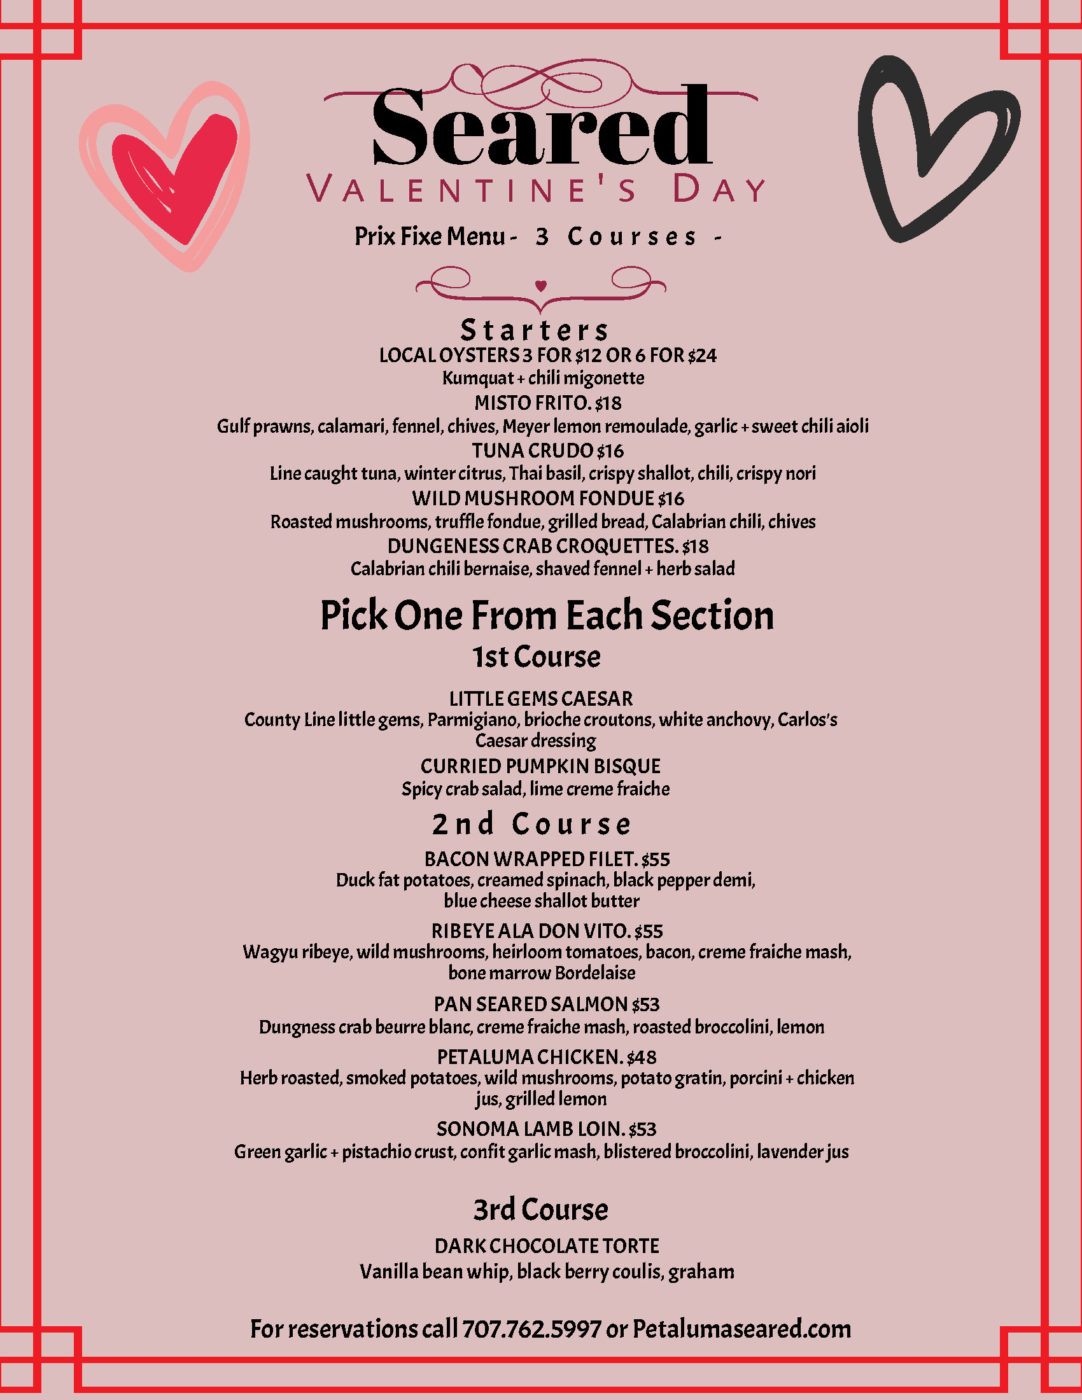 Limited Special Valentine's Day 3-course menu available at Seared in Petaluma